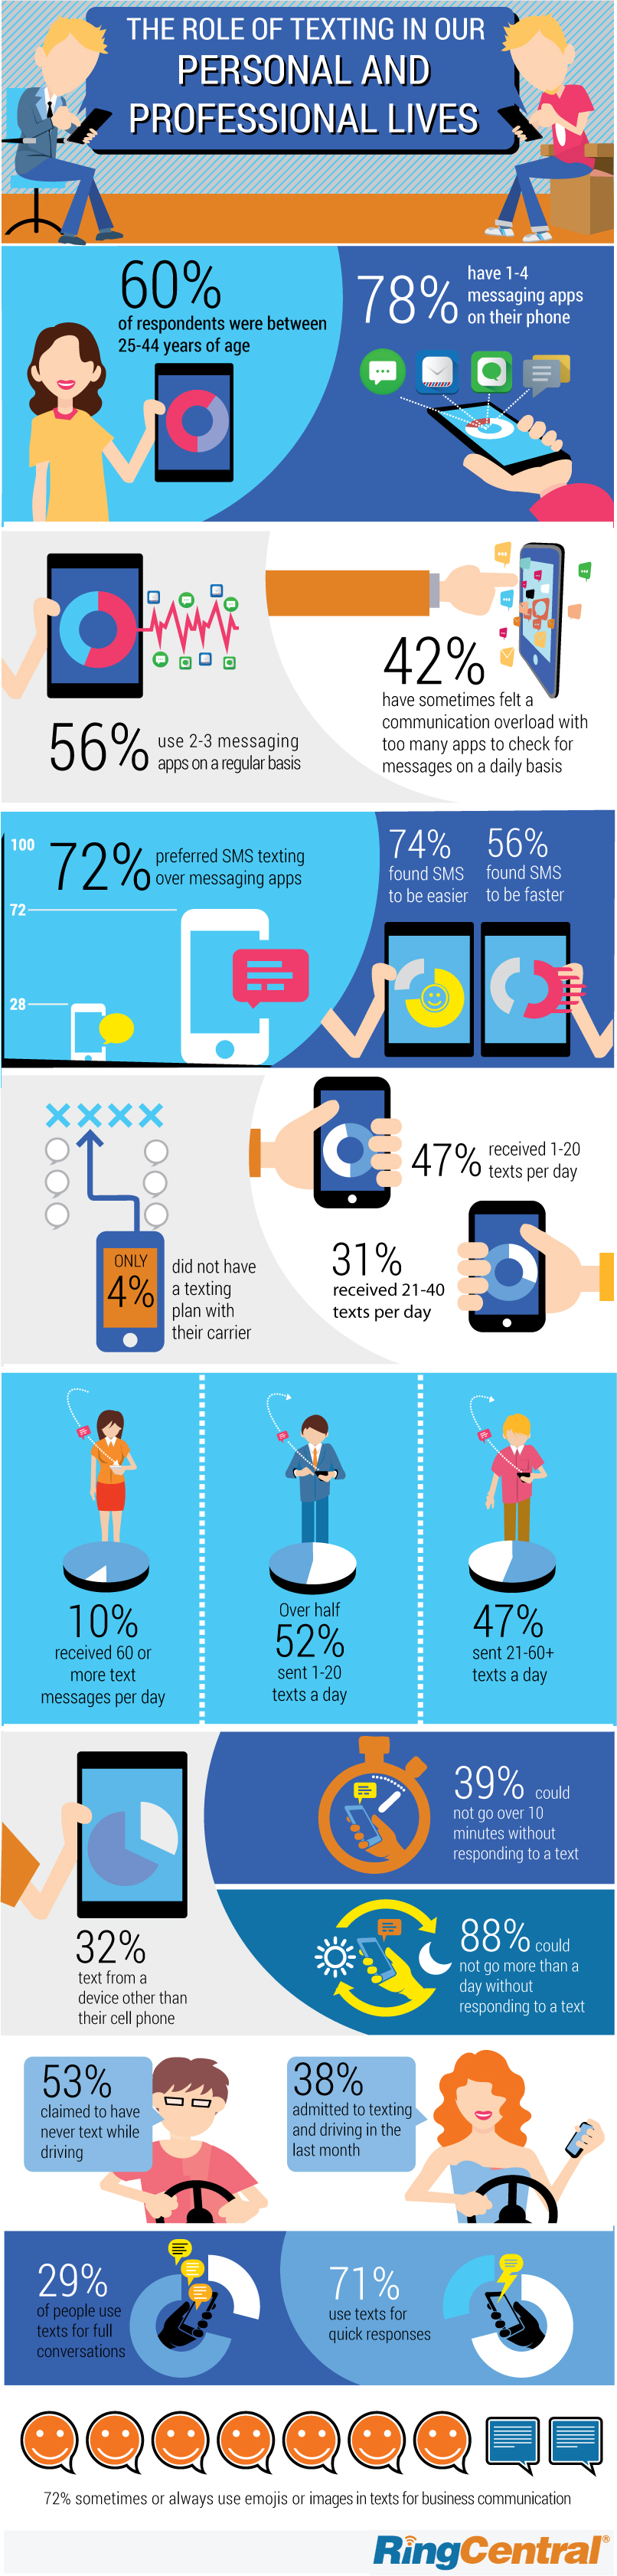 RingCentral Texting Infographic: The Role of Texting in our Personal and Professional Lives